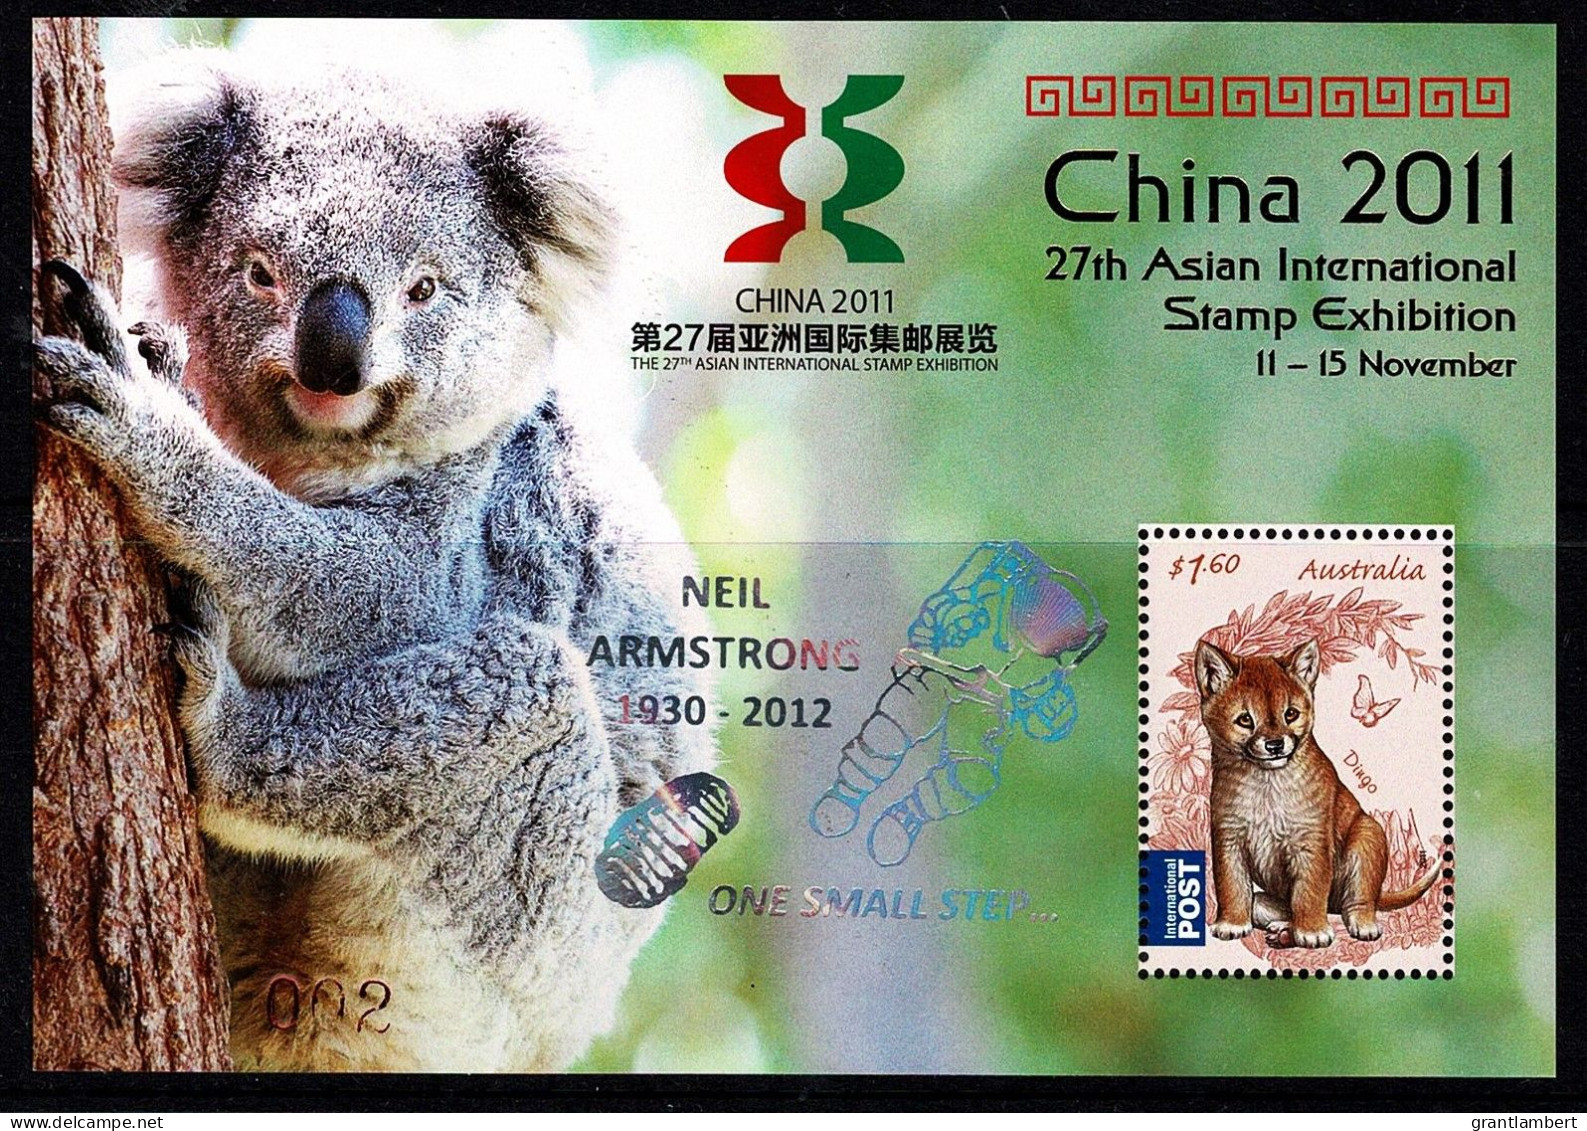 Australia 2011 China 2011 Exhib. Minisheet OP NEIL ARMSTRONG -One Small Step MNH - Ungebraucht